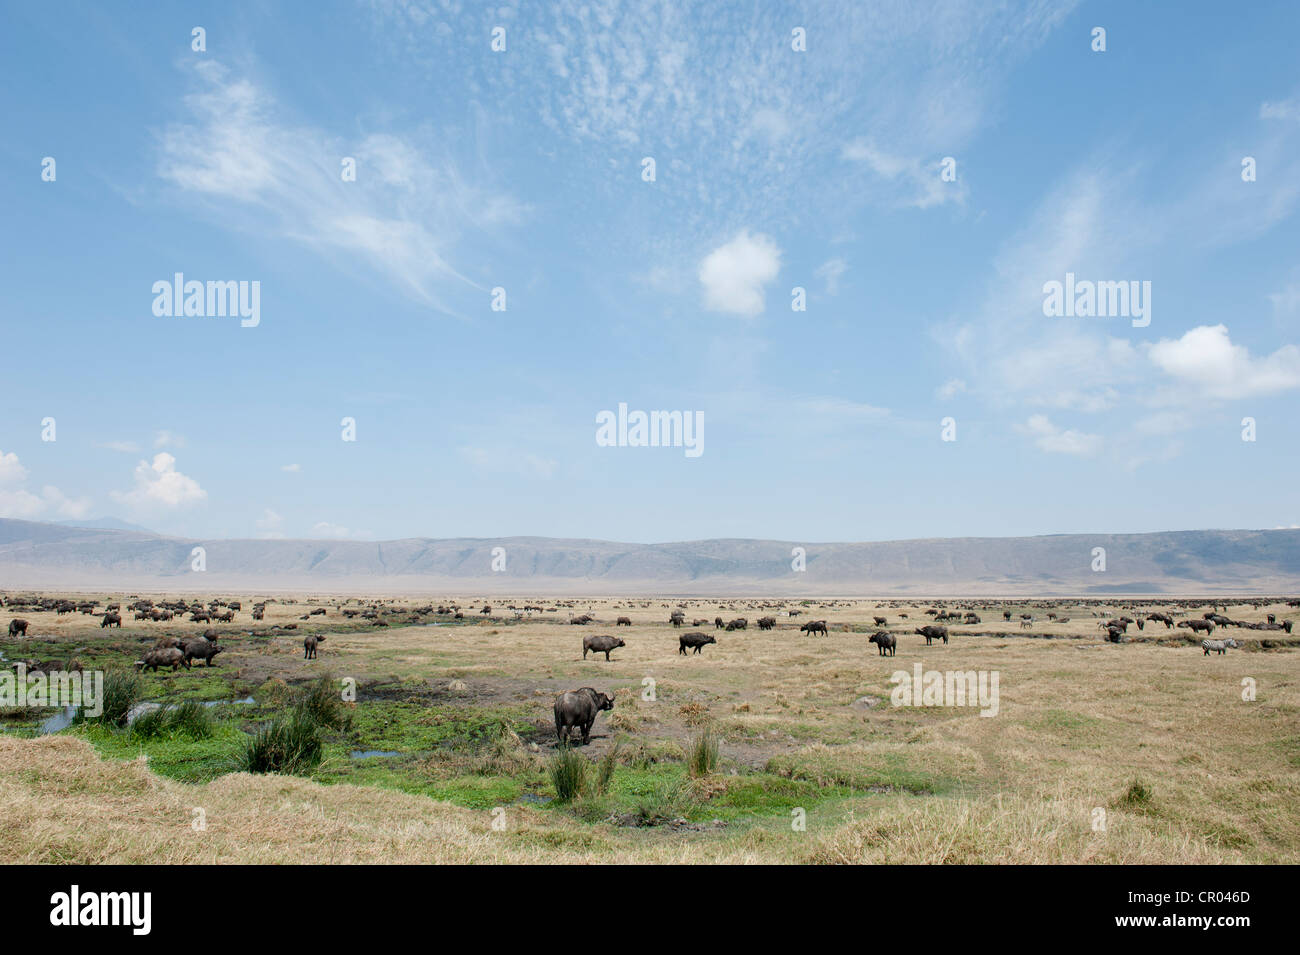 Large herd of Cape Buffalo or African Buffalo (Syncerus caffer), grasslands in the crater, Ngorongoro Conservation Area Stock Photo